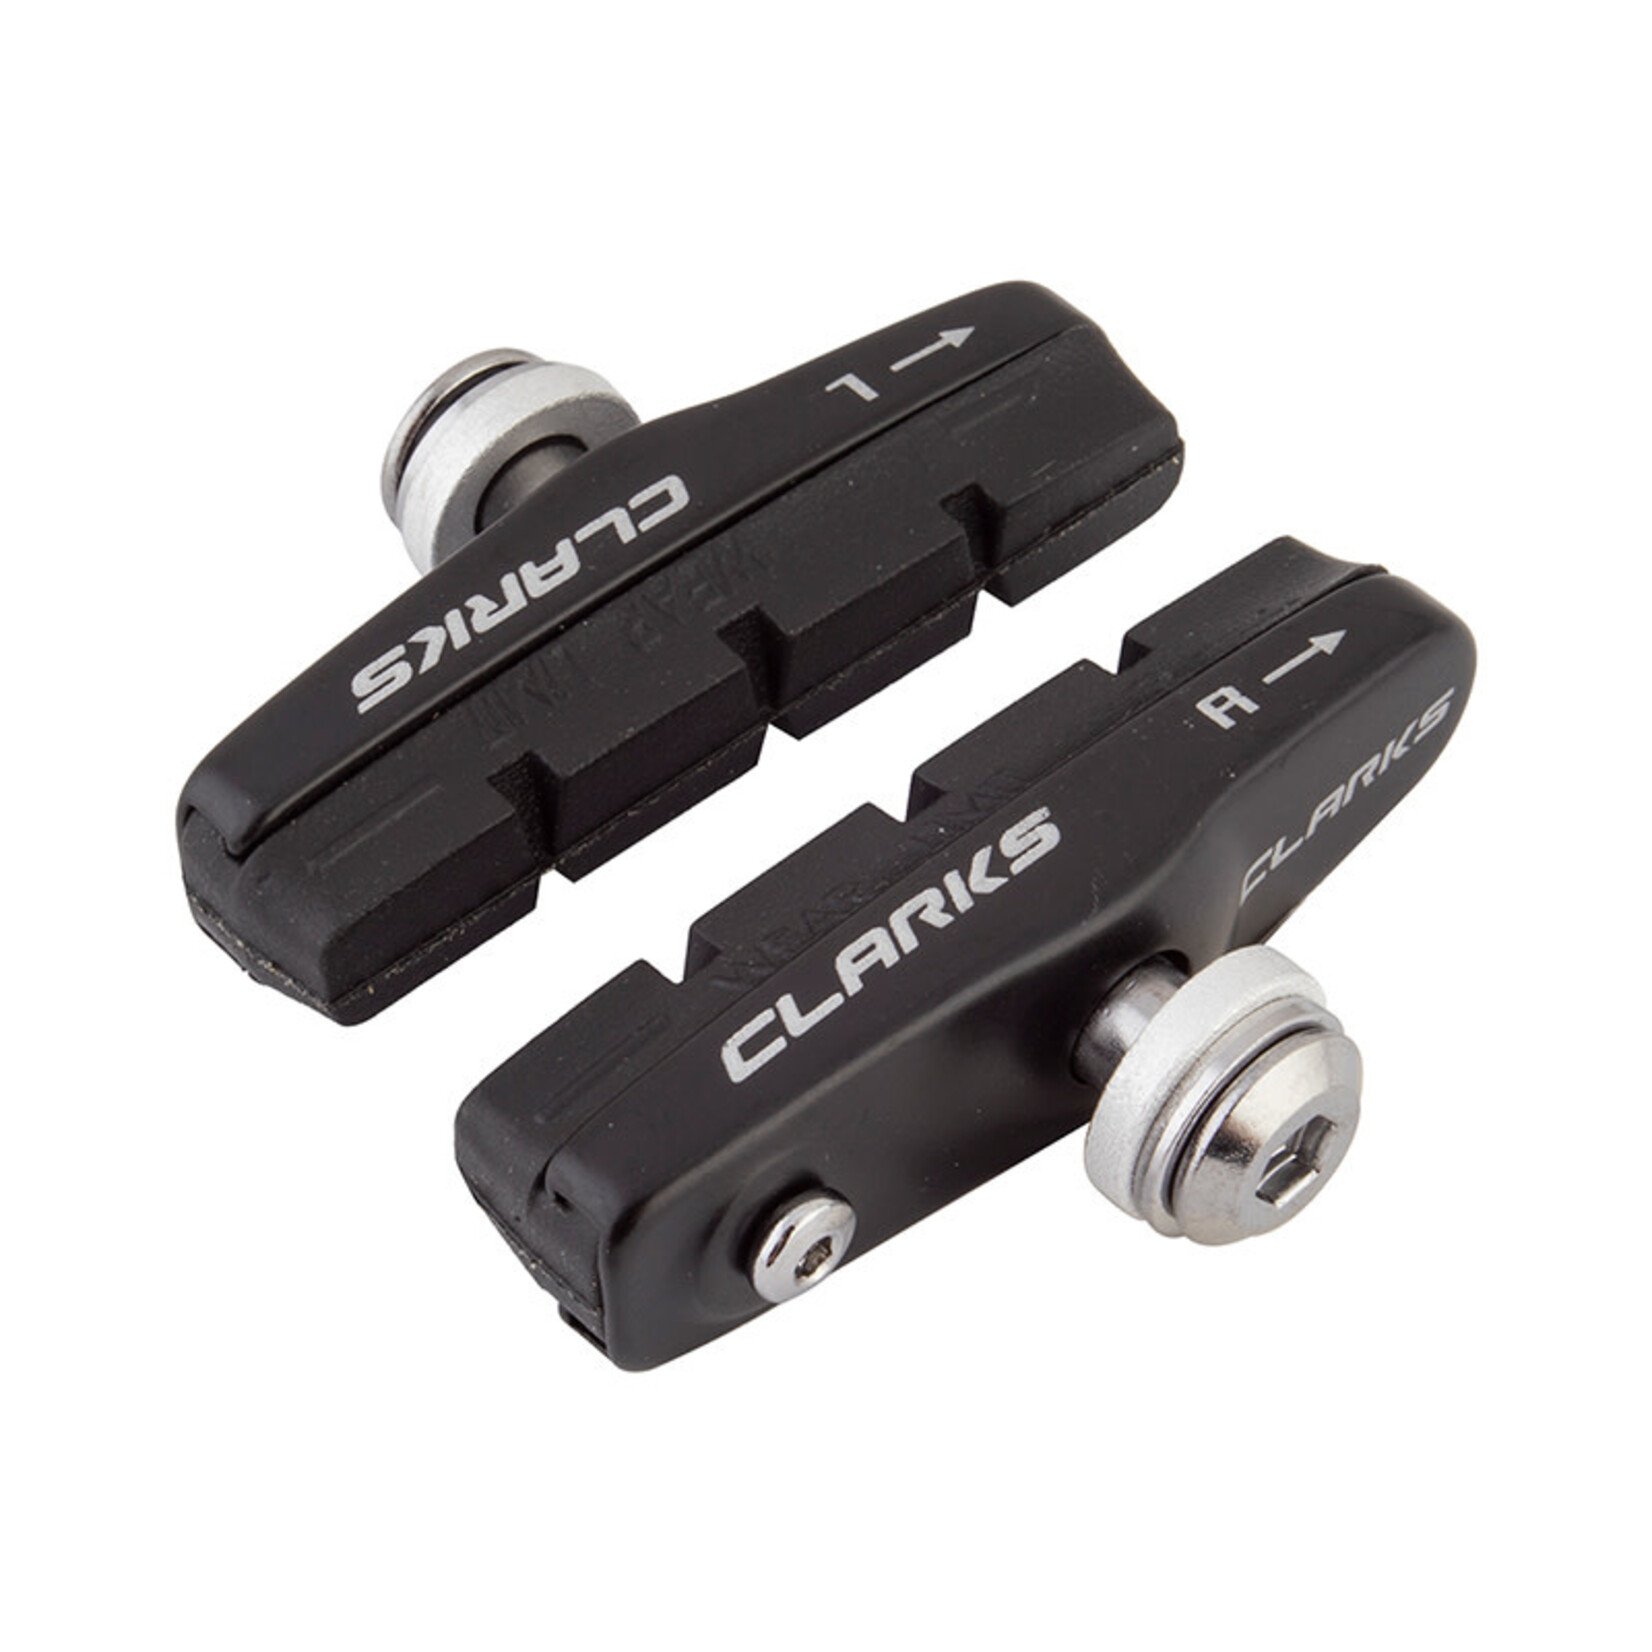 CLARKS BRAKE SHOES Clarks CPS459 Road Pad